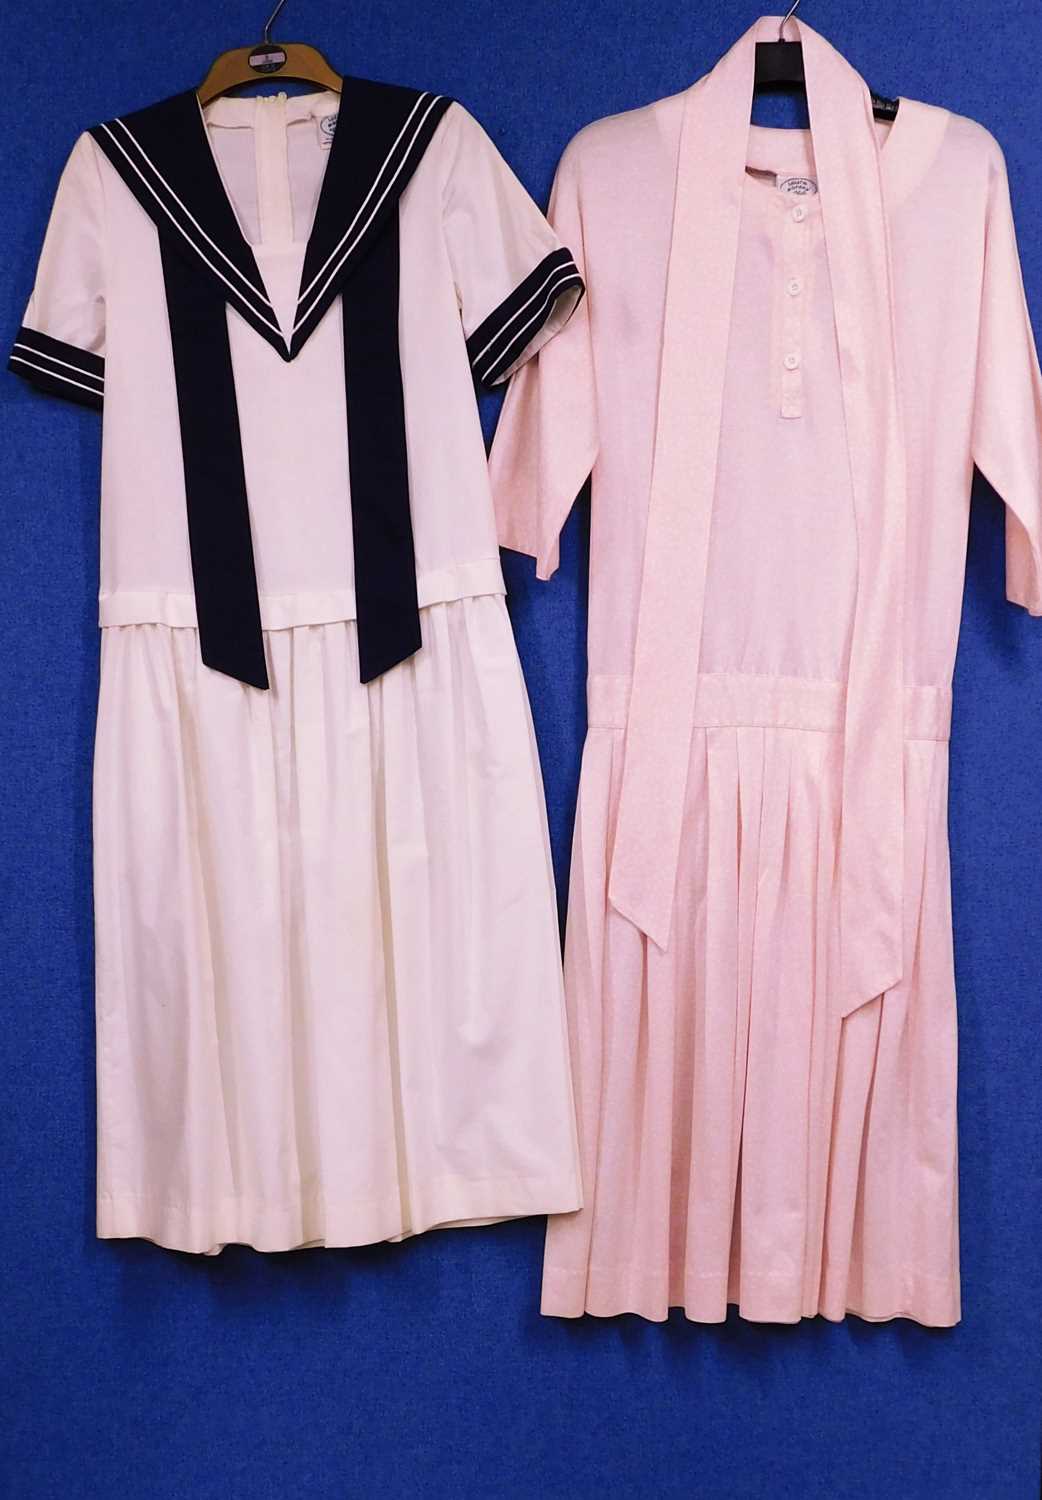 Two Laura Ashley dresses to include a cream and navy blue sailor dress and a pink and white